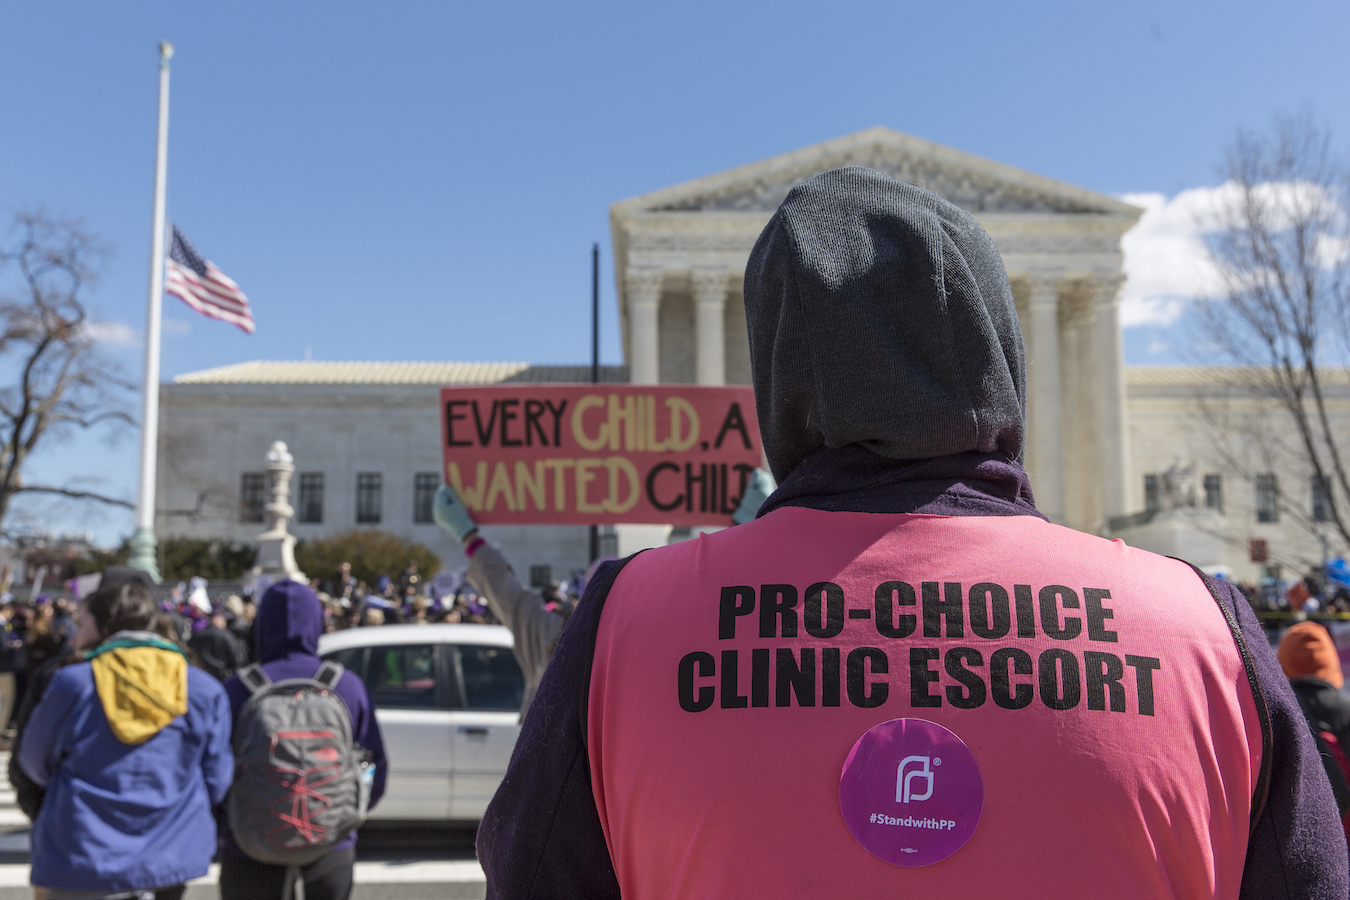 Pro-choice and anti-abortion protesters outside the U.S. Supreme Court